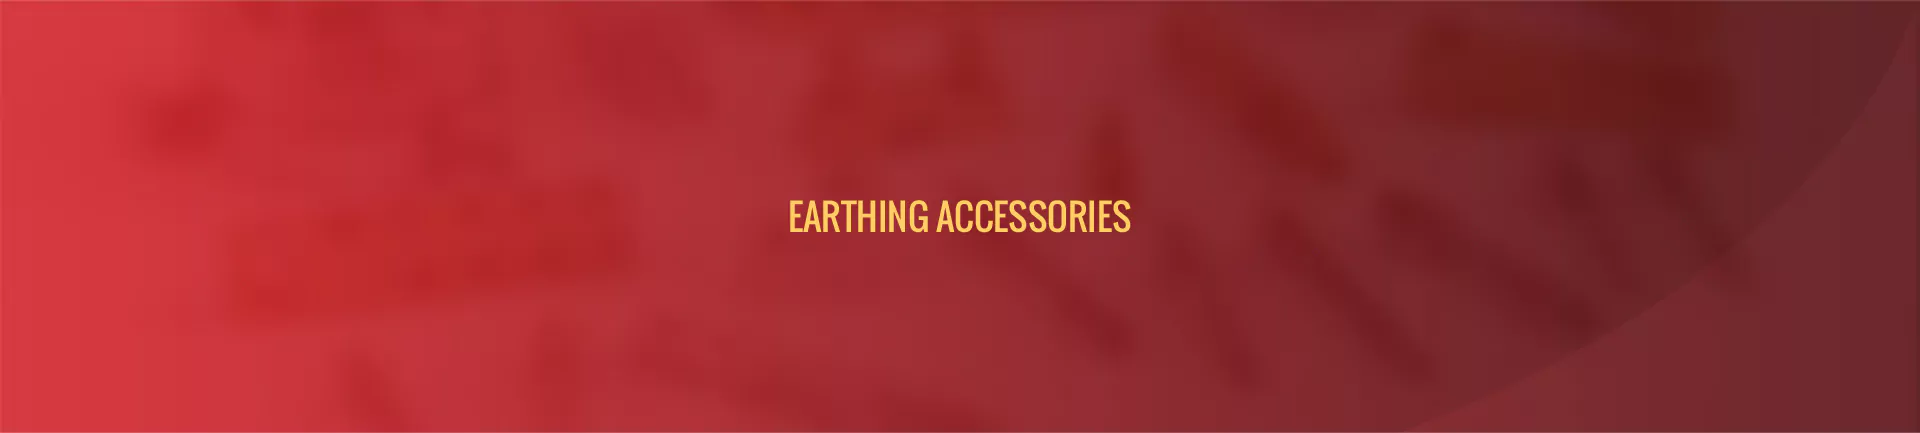 earthing-accessories-banner